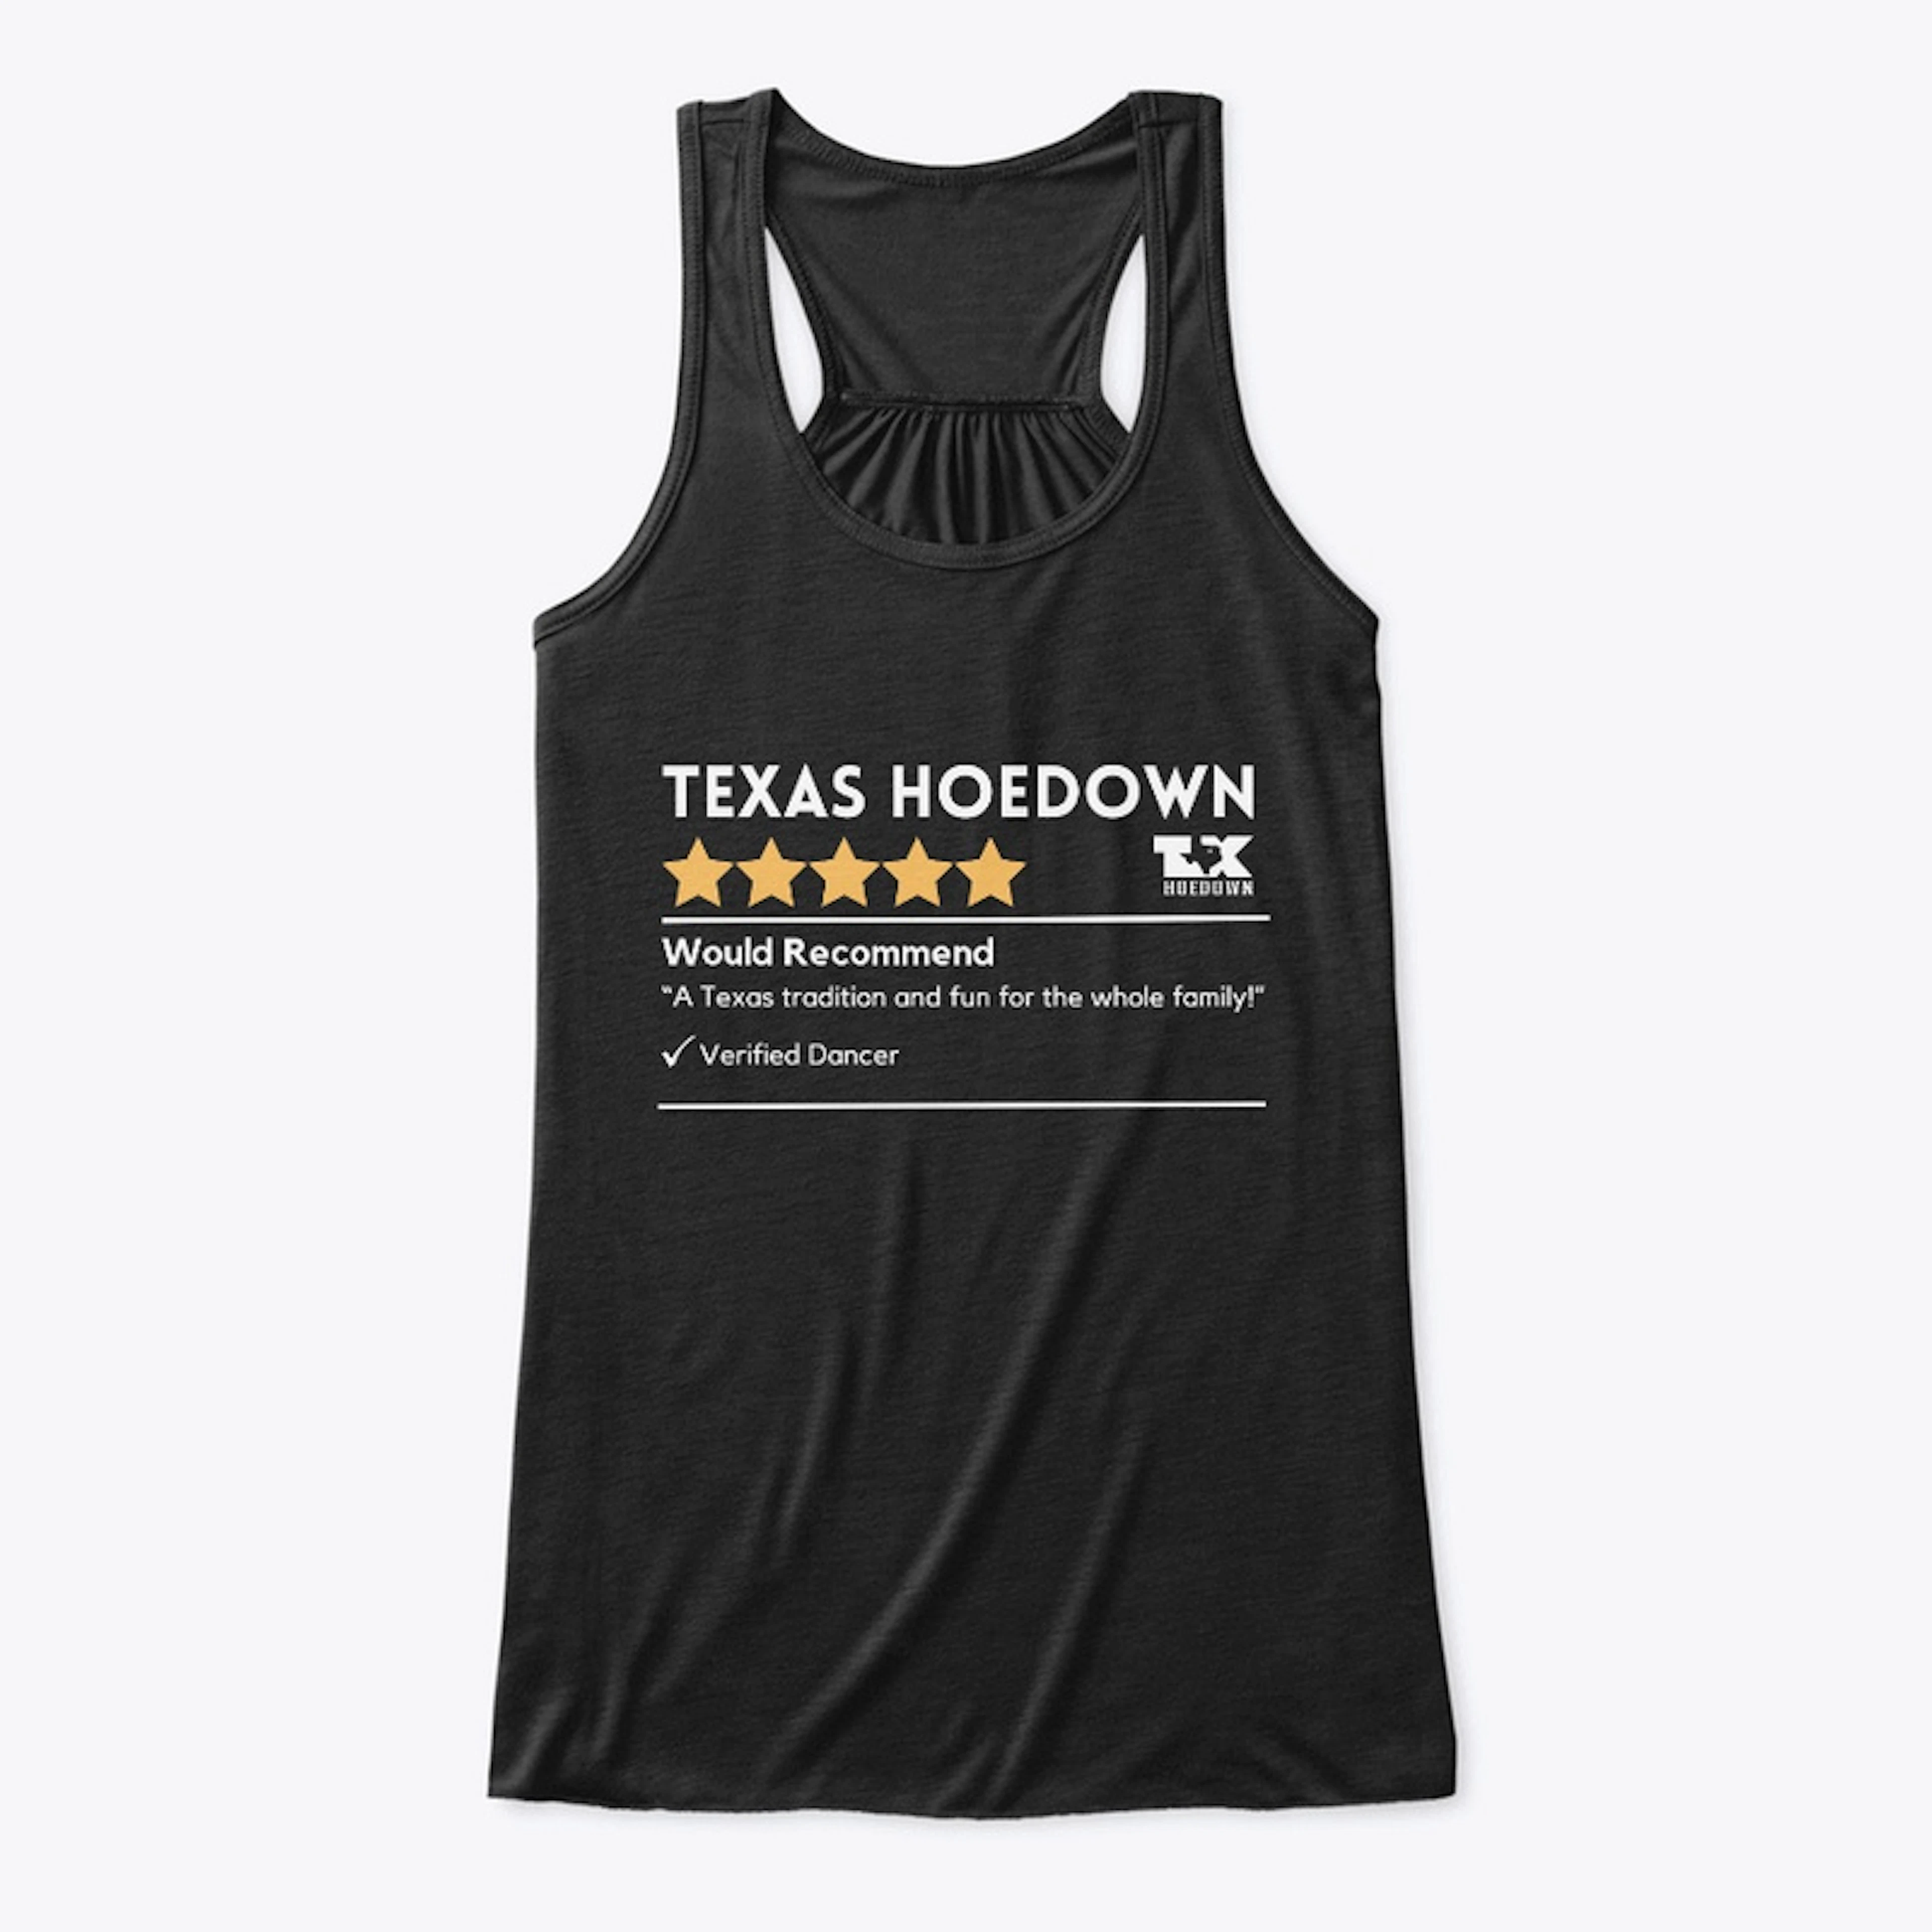 Texas Hoedown...Would Recommend